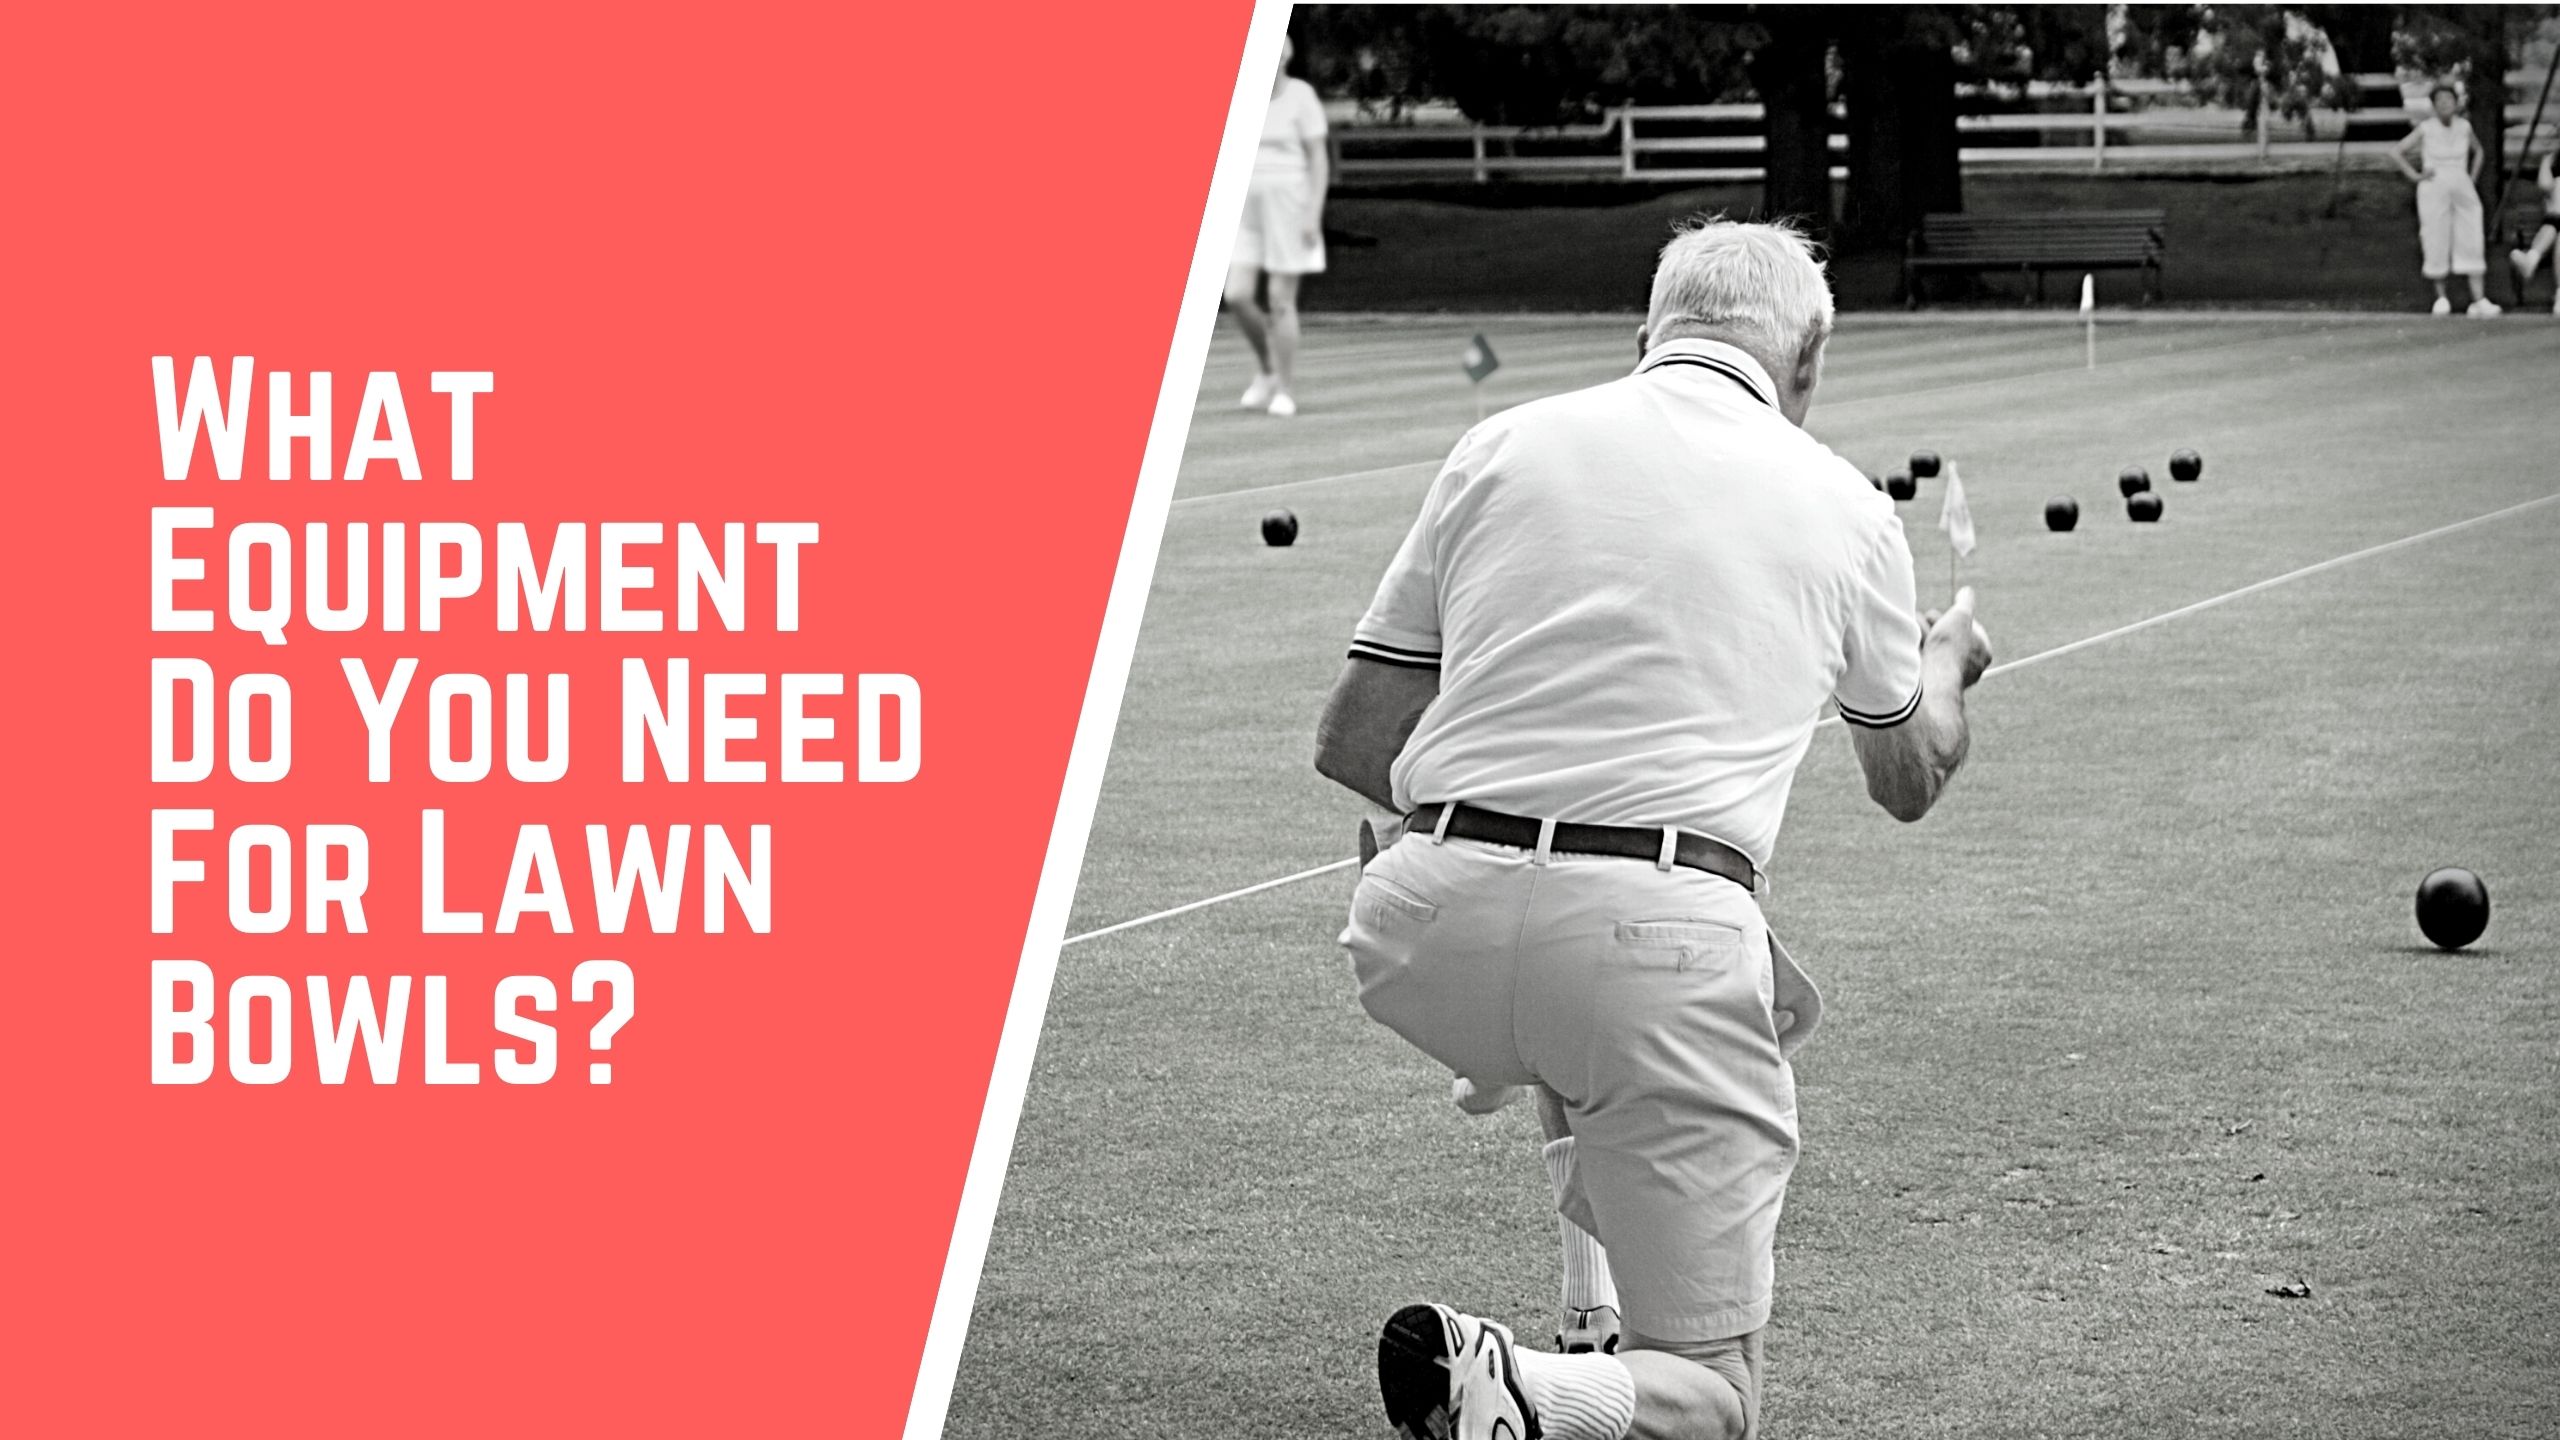 What Equipment Do You Need For Lawn Bowls?